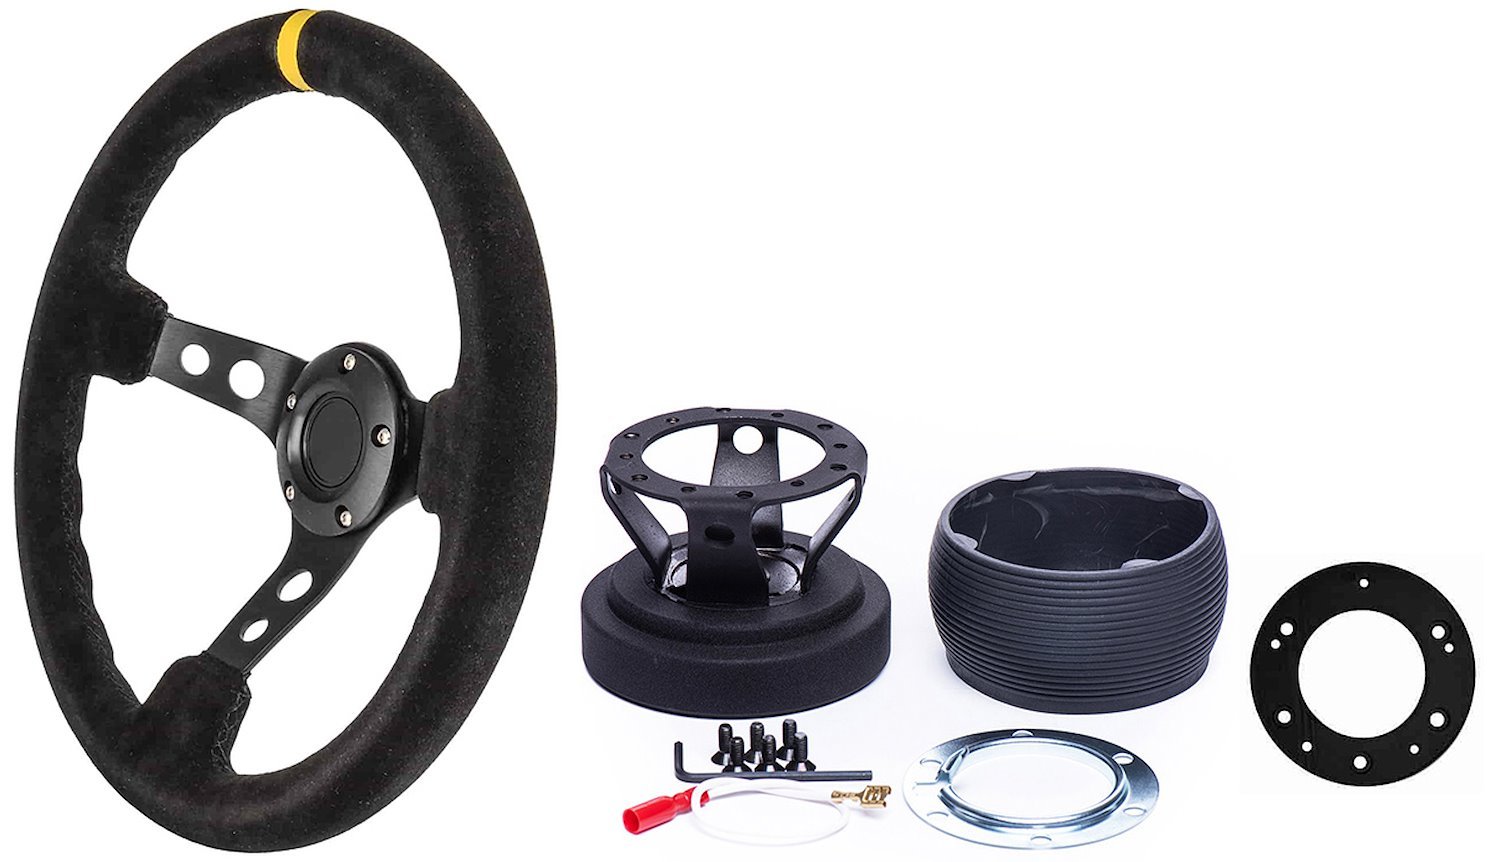 Aluminum Hub Adapter, Adapter Plate, and Black Suede Racing Steering Wheel Kit [Black Frame] - Fits Select GM and Mopar Models